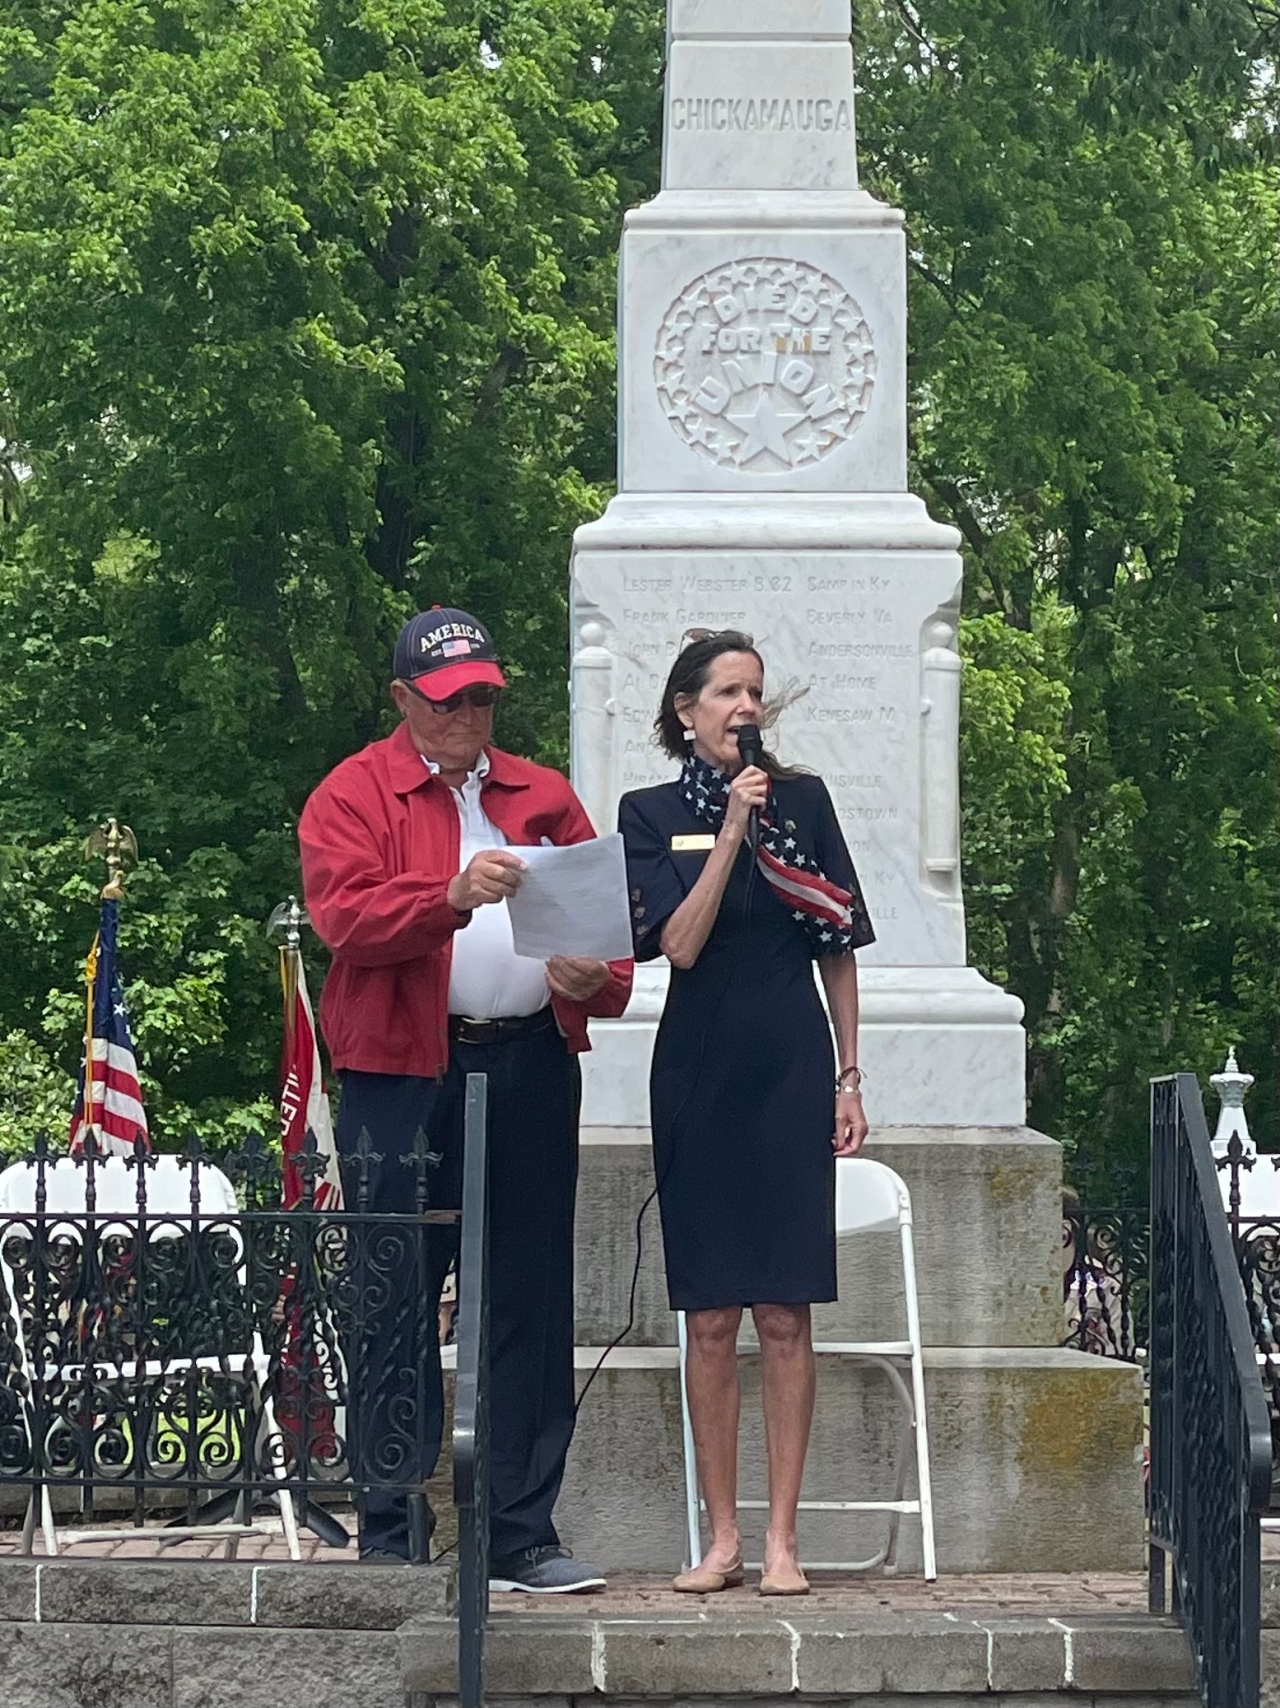 Representative Richardson was honored to provide the keynote speech at Milford Center's Memorial Day Speech on May 27th.